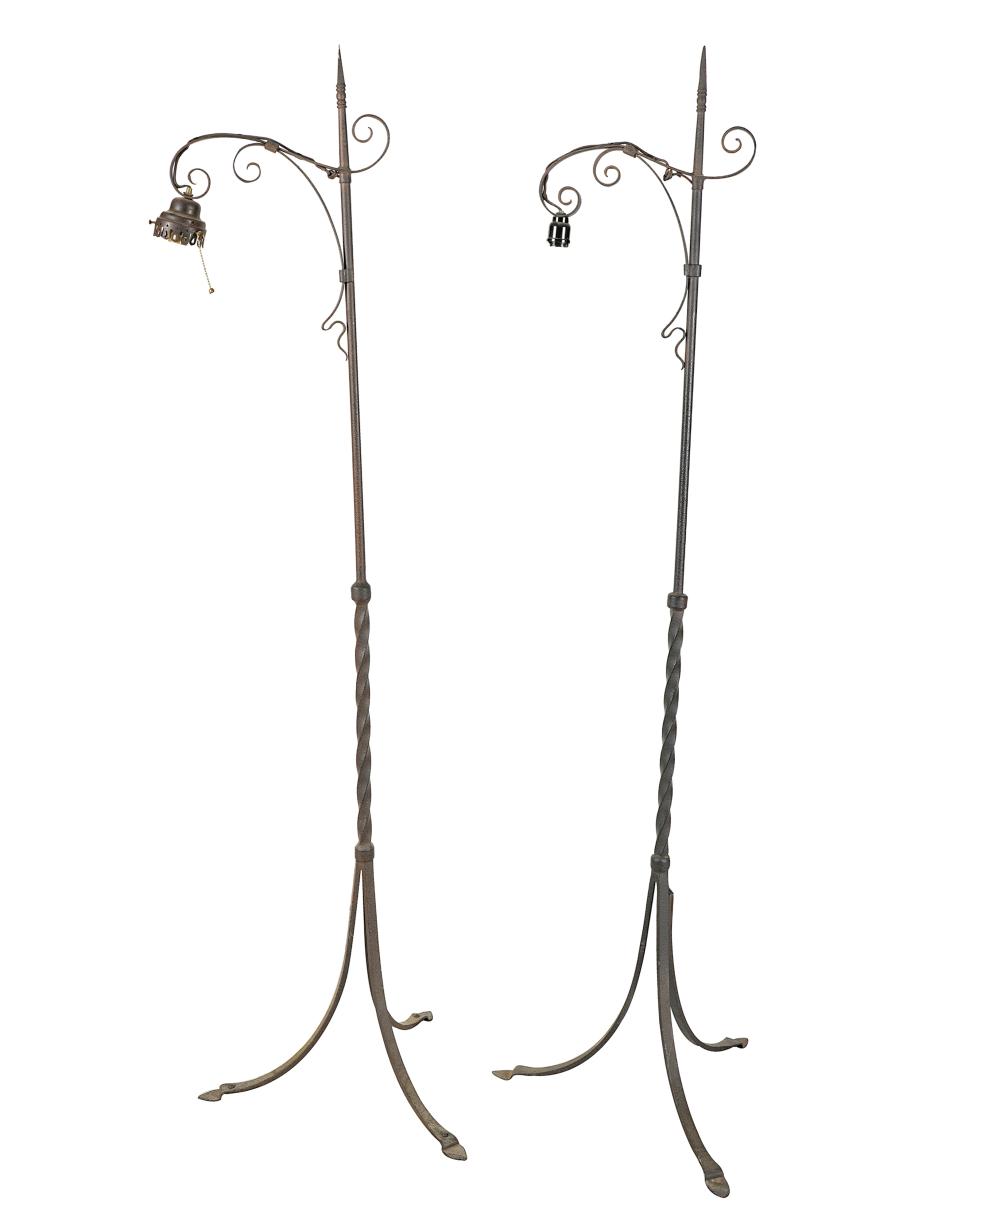 PAIR OF WROUGHT IRON FLOOR LAMPSeach 3302ab